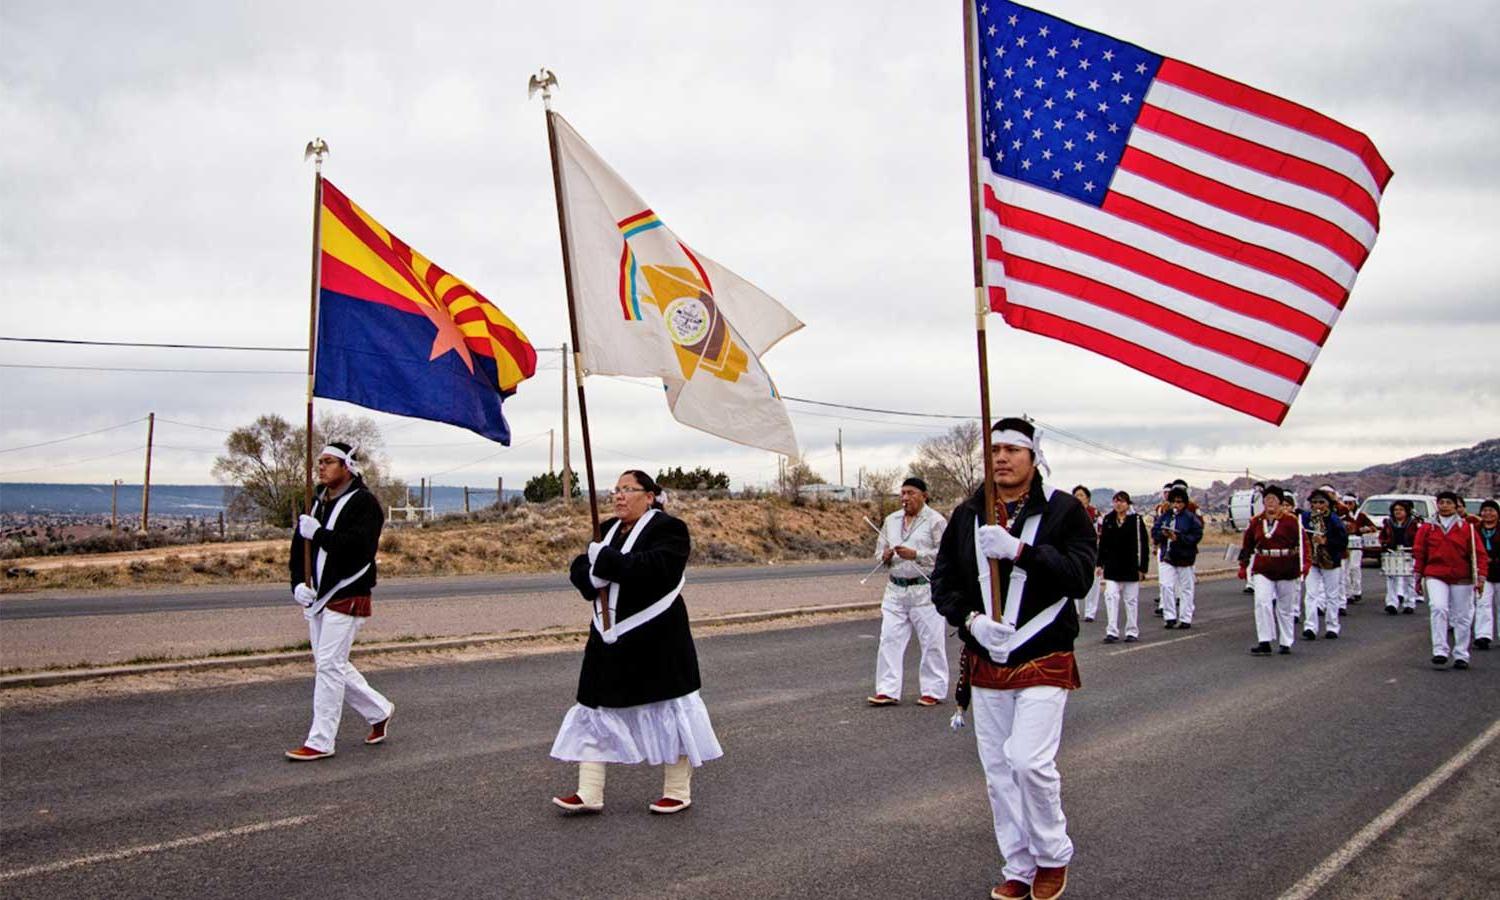 The Navajo Nation band march towards the Capital in Window Rock, AZ.